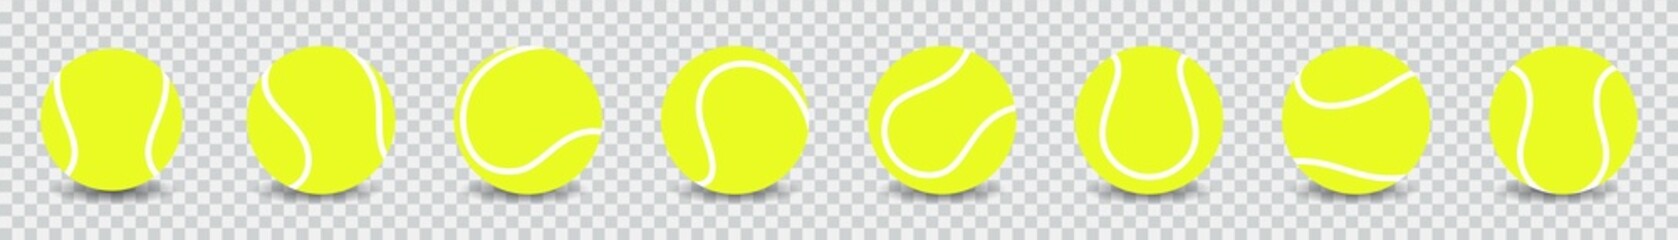 Tennis ball icon set isolated on transparent background. Tennis ball sport collection. Vector illustration.